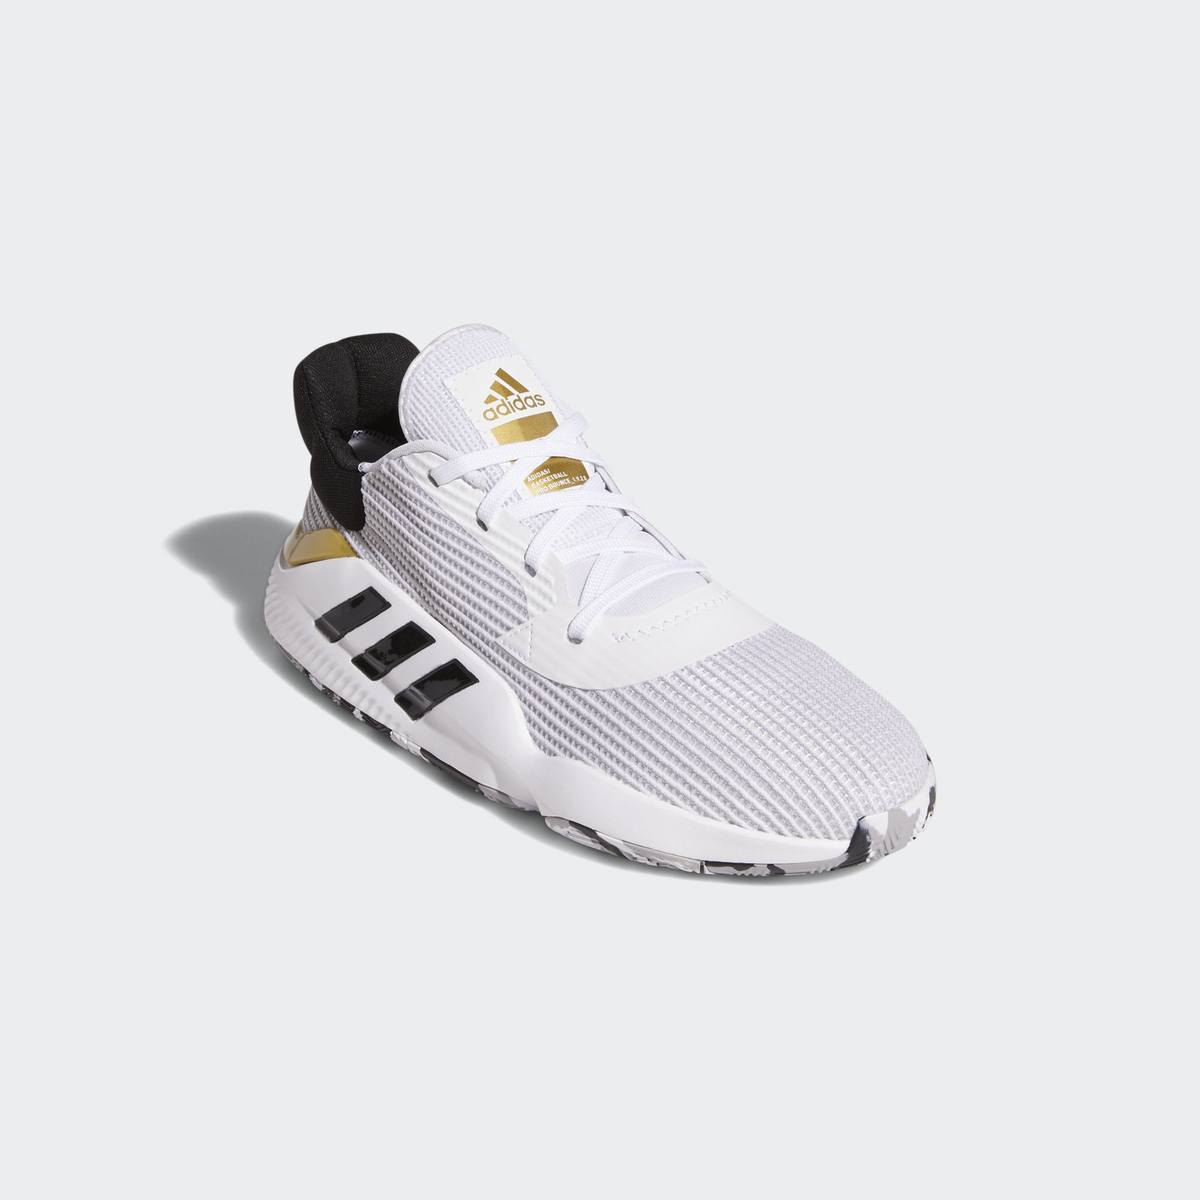 adidas-Pro-Bounce-2019-Low-2 - WearTesters